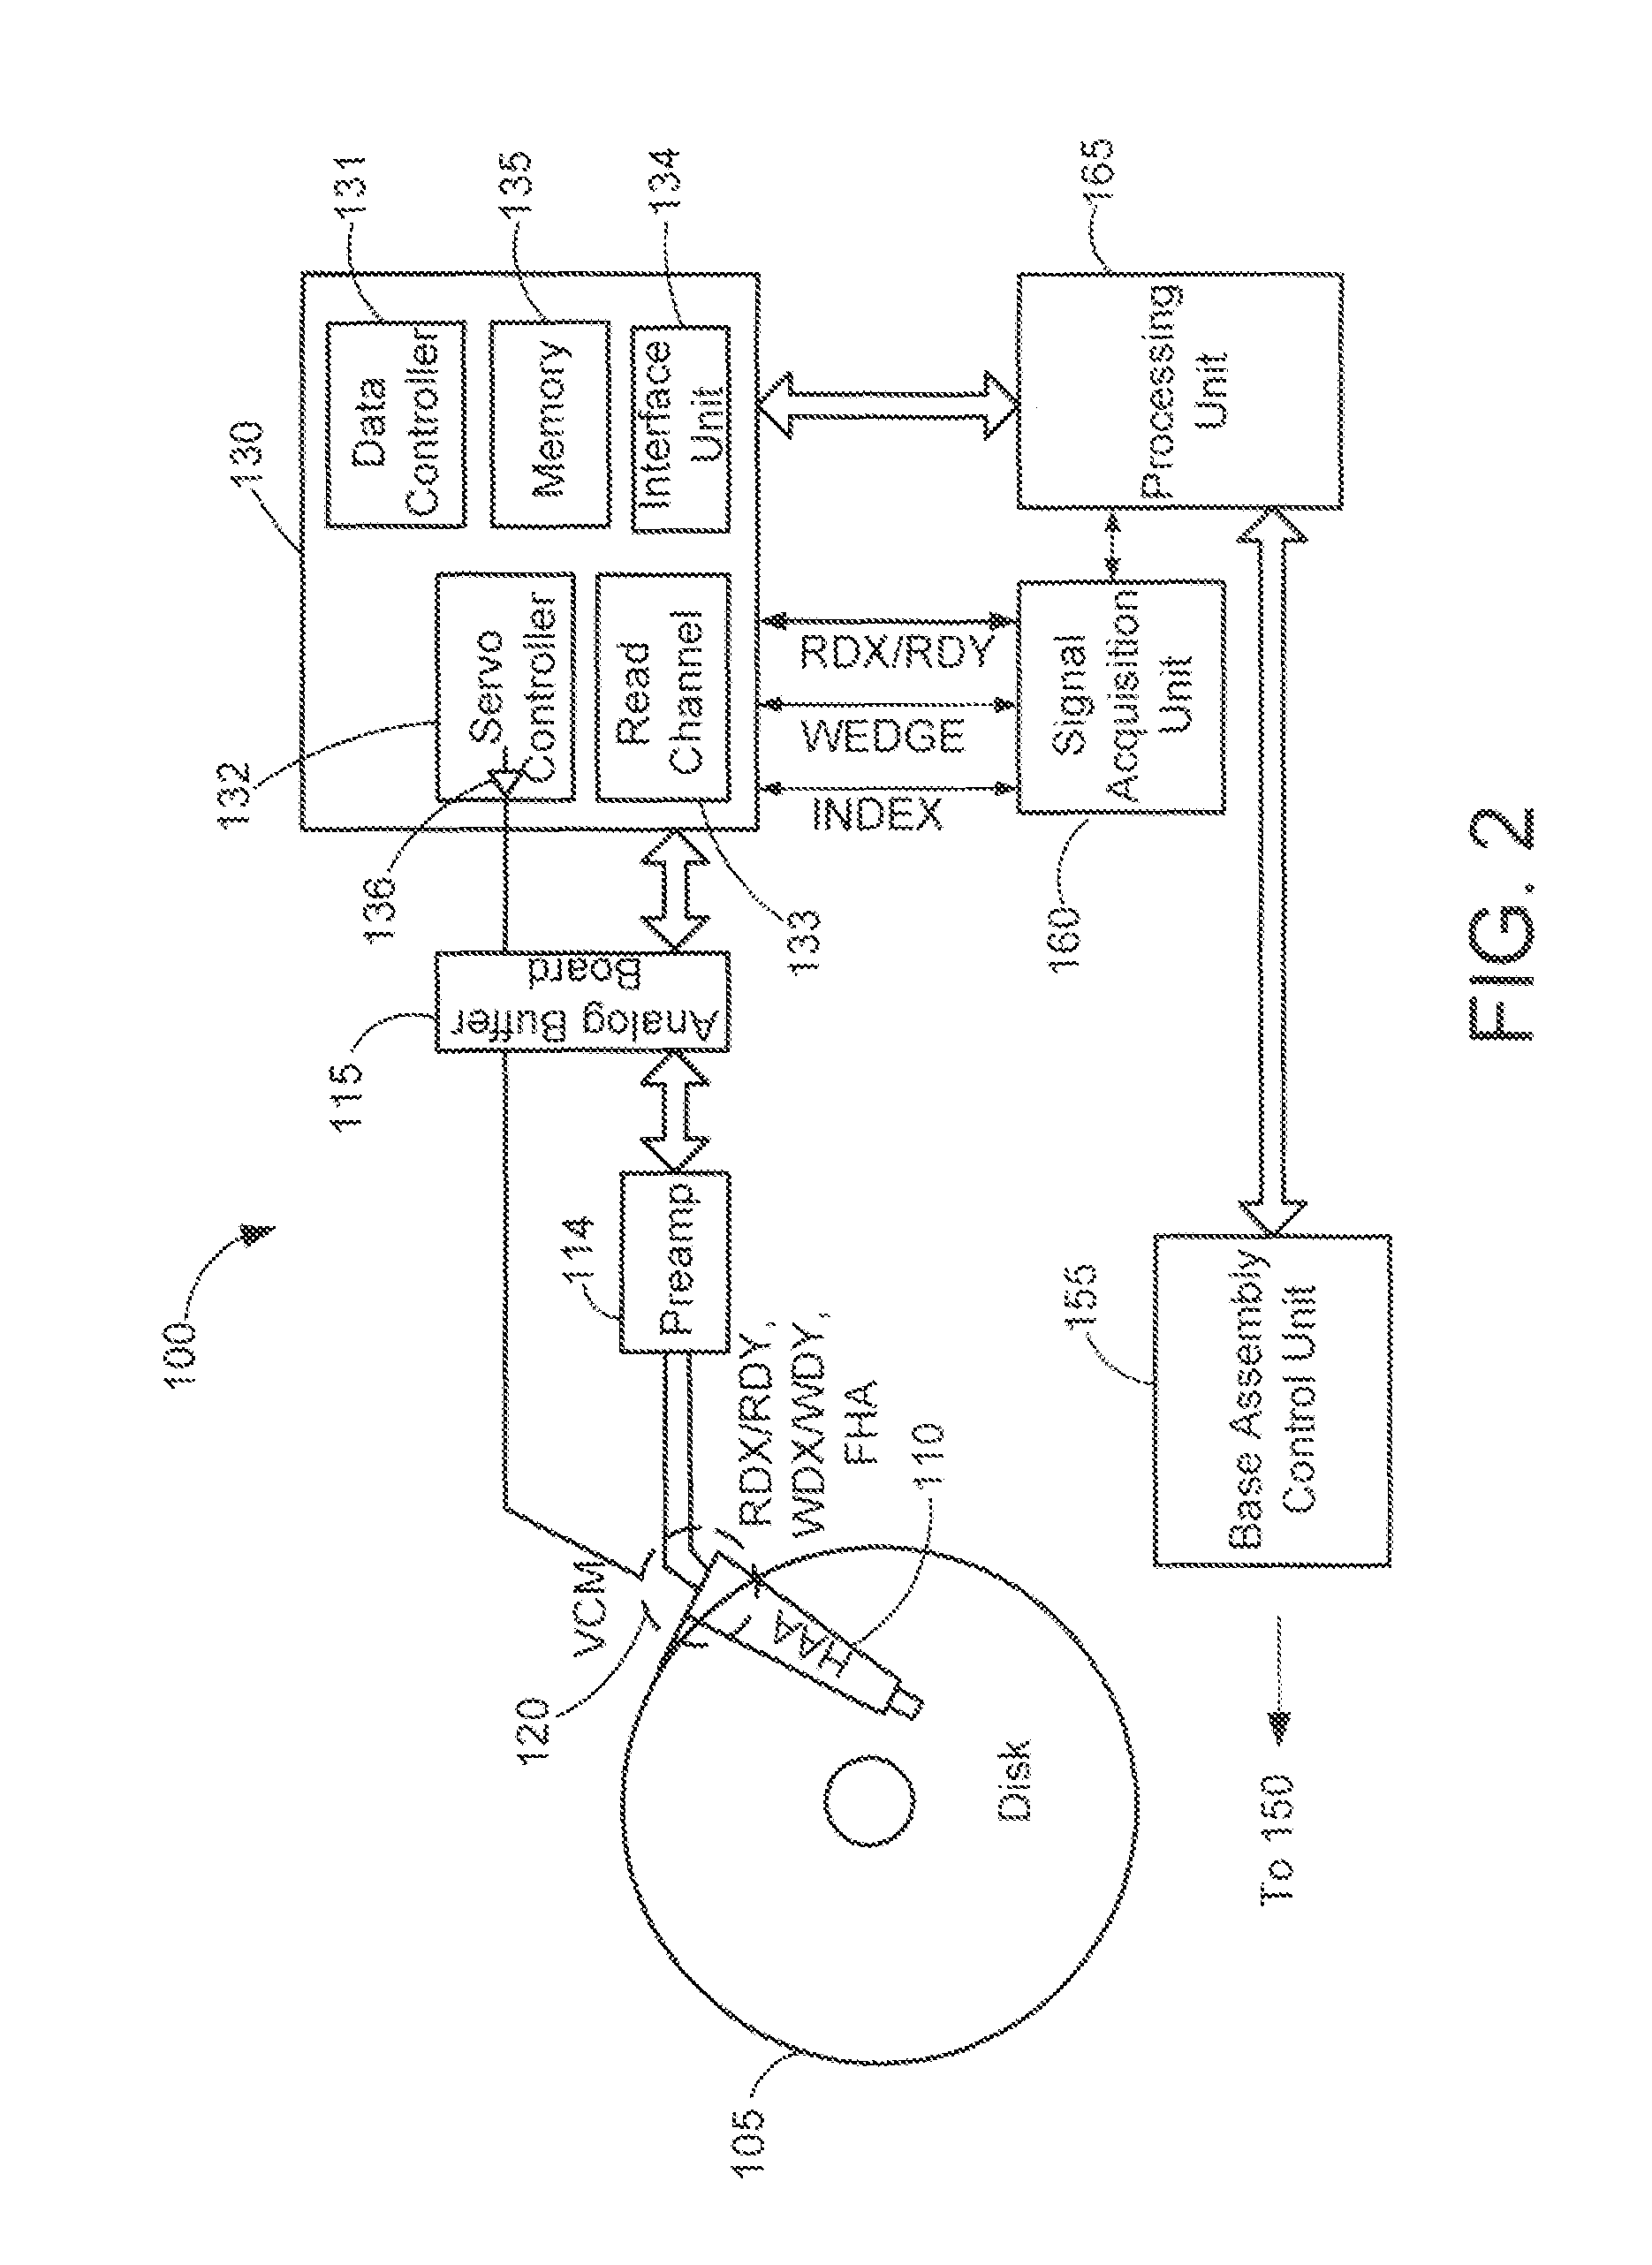 Apparatus and method for testing magnetic disk drive components using drive-based parts